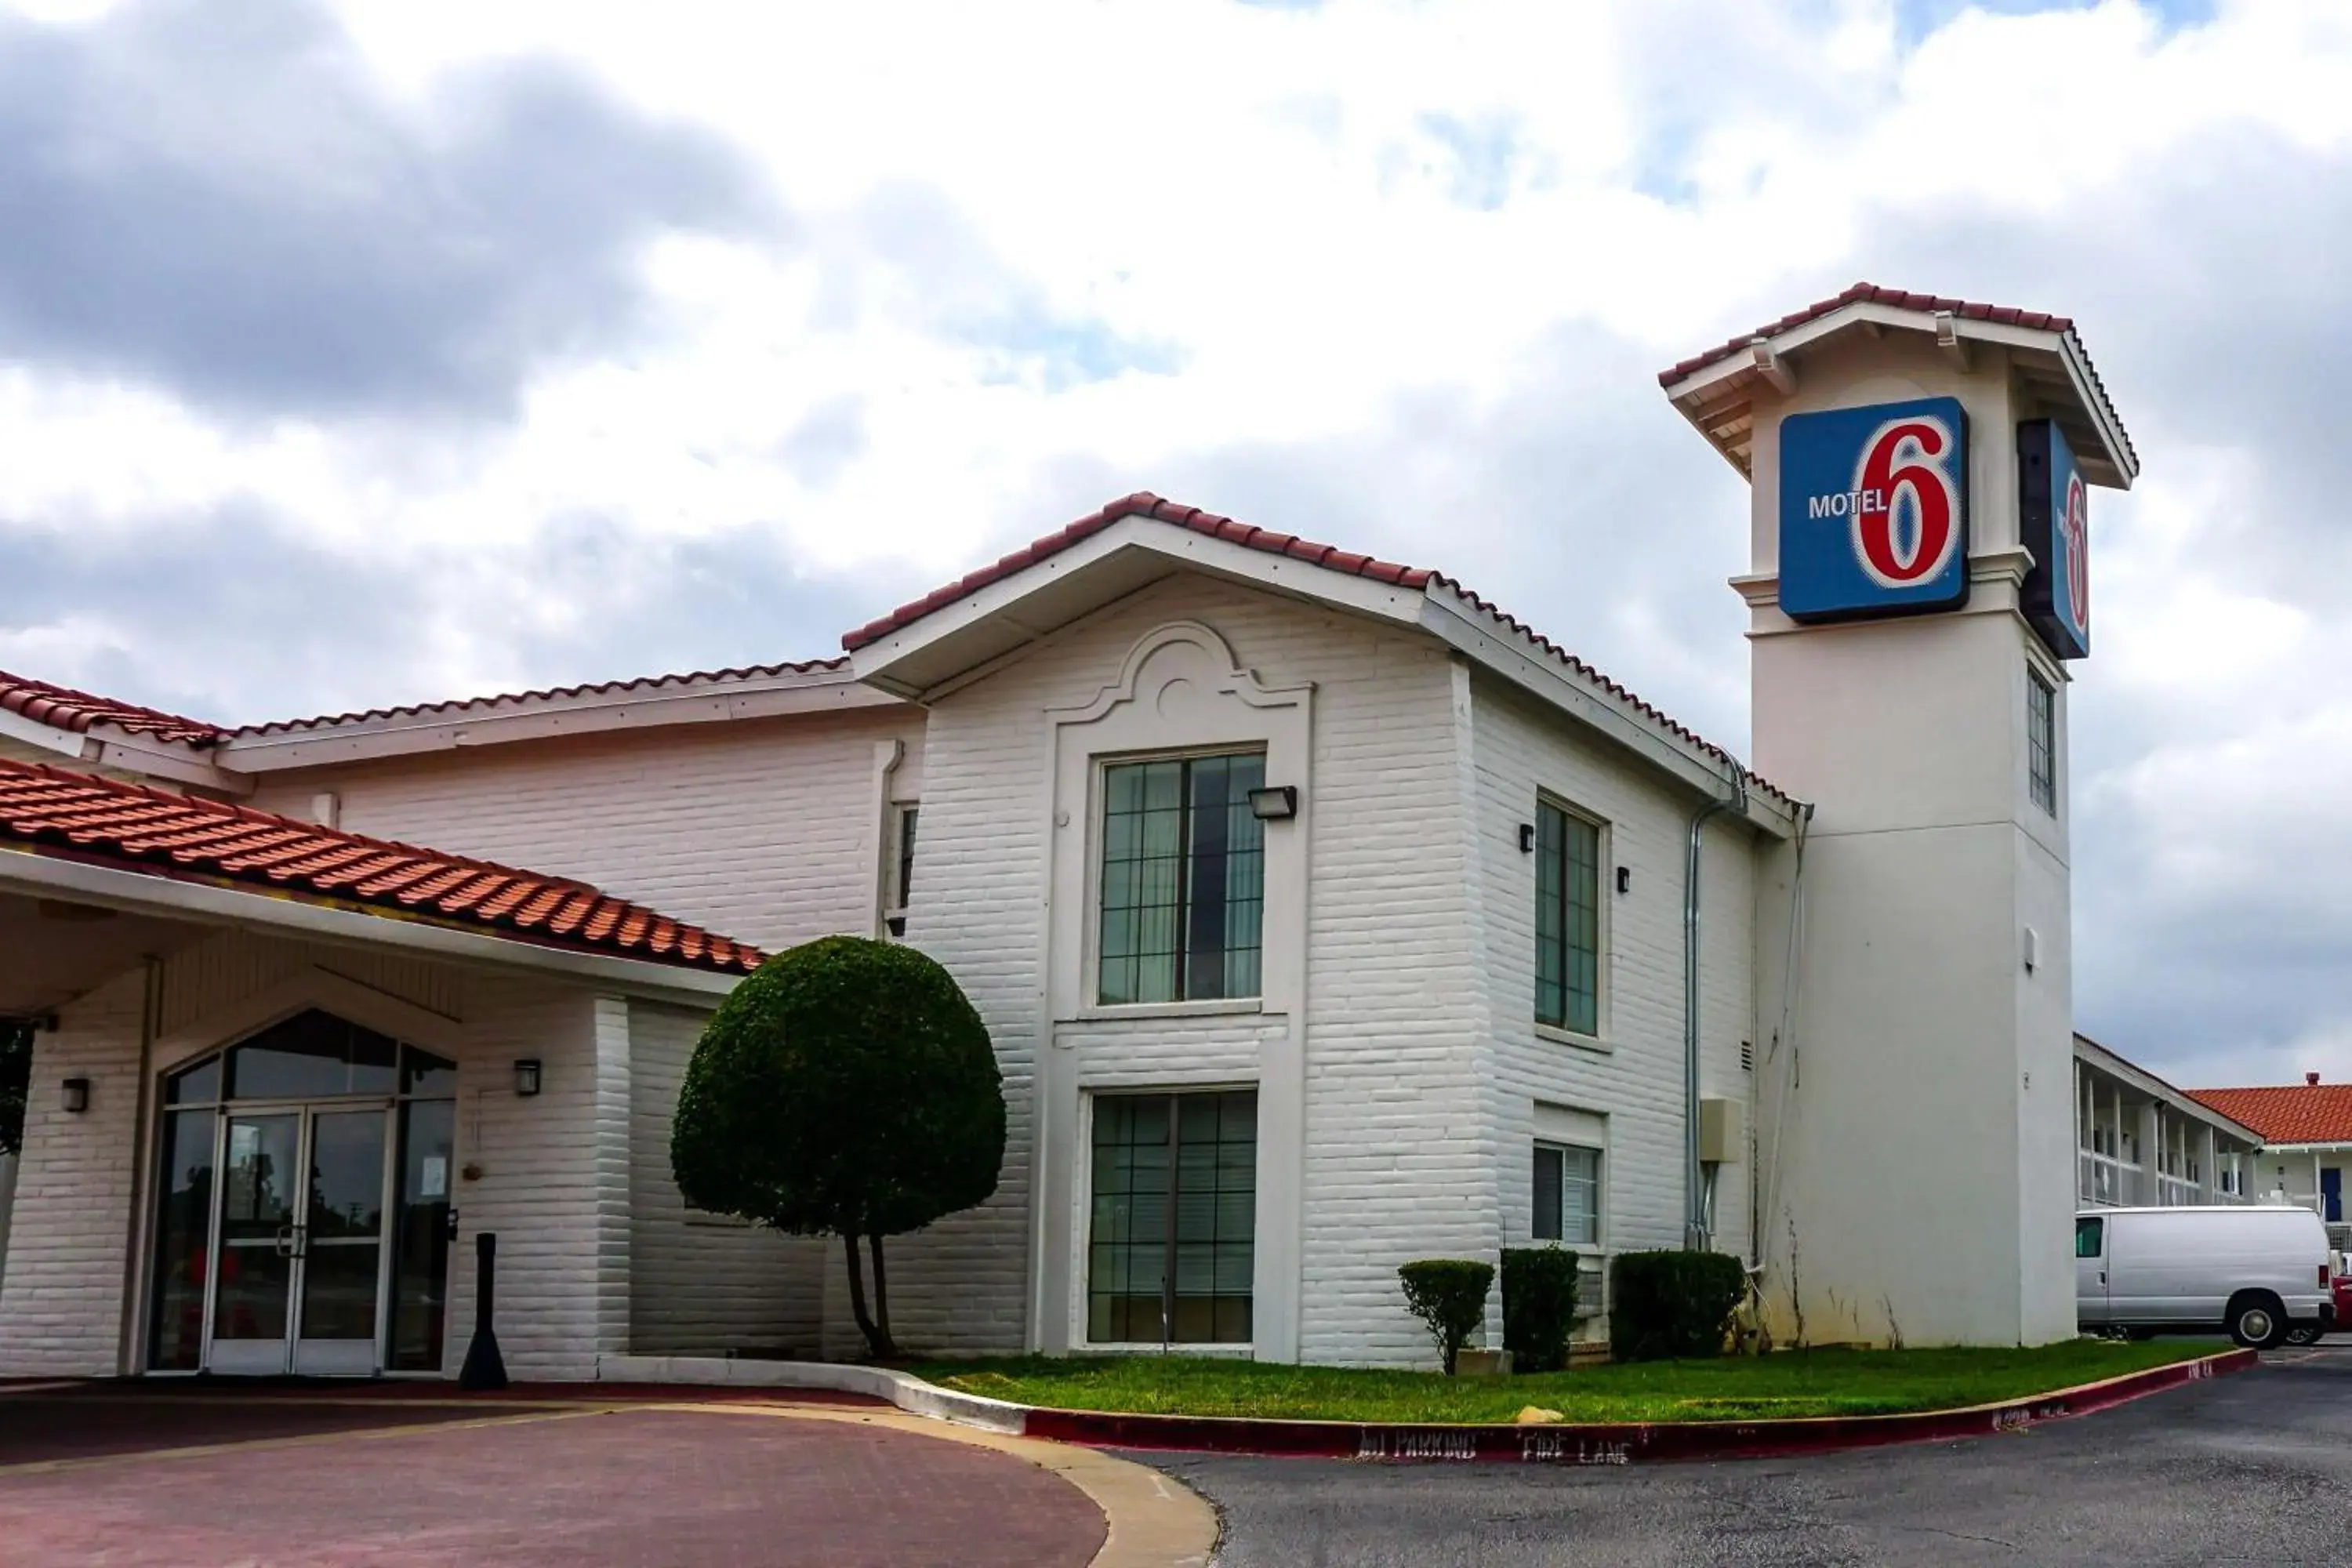 Property building in Motel 6-Euless, TX - DFW West